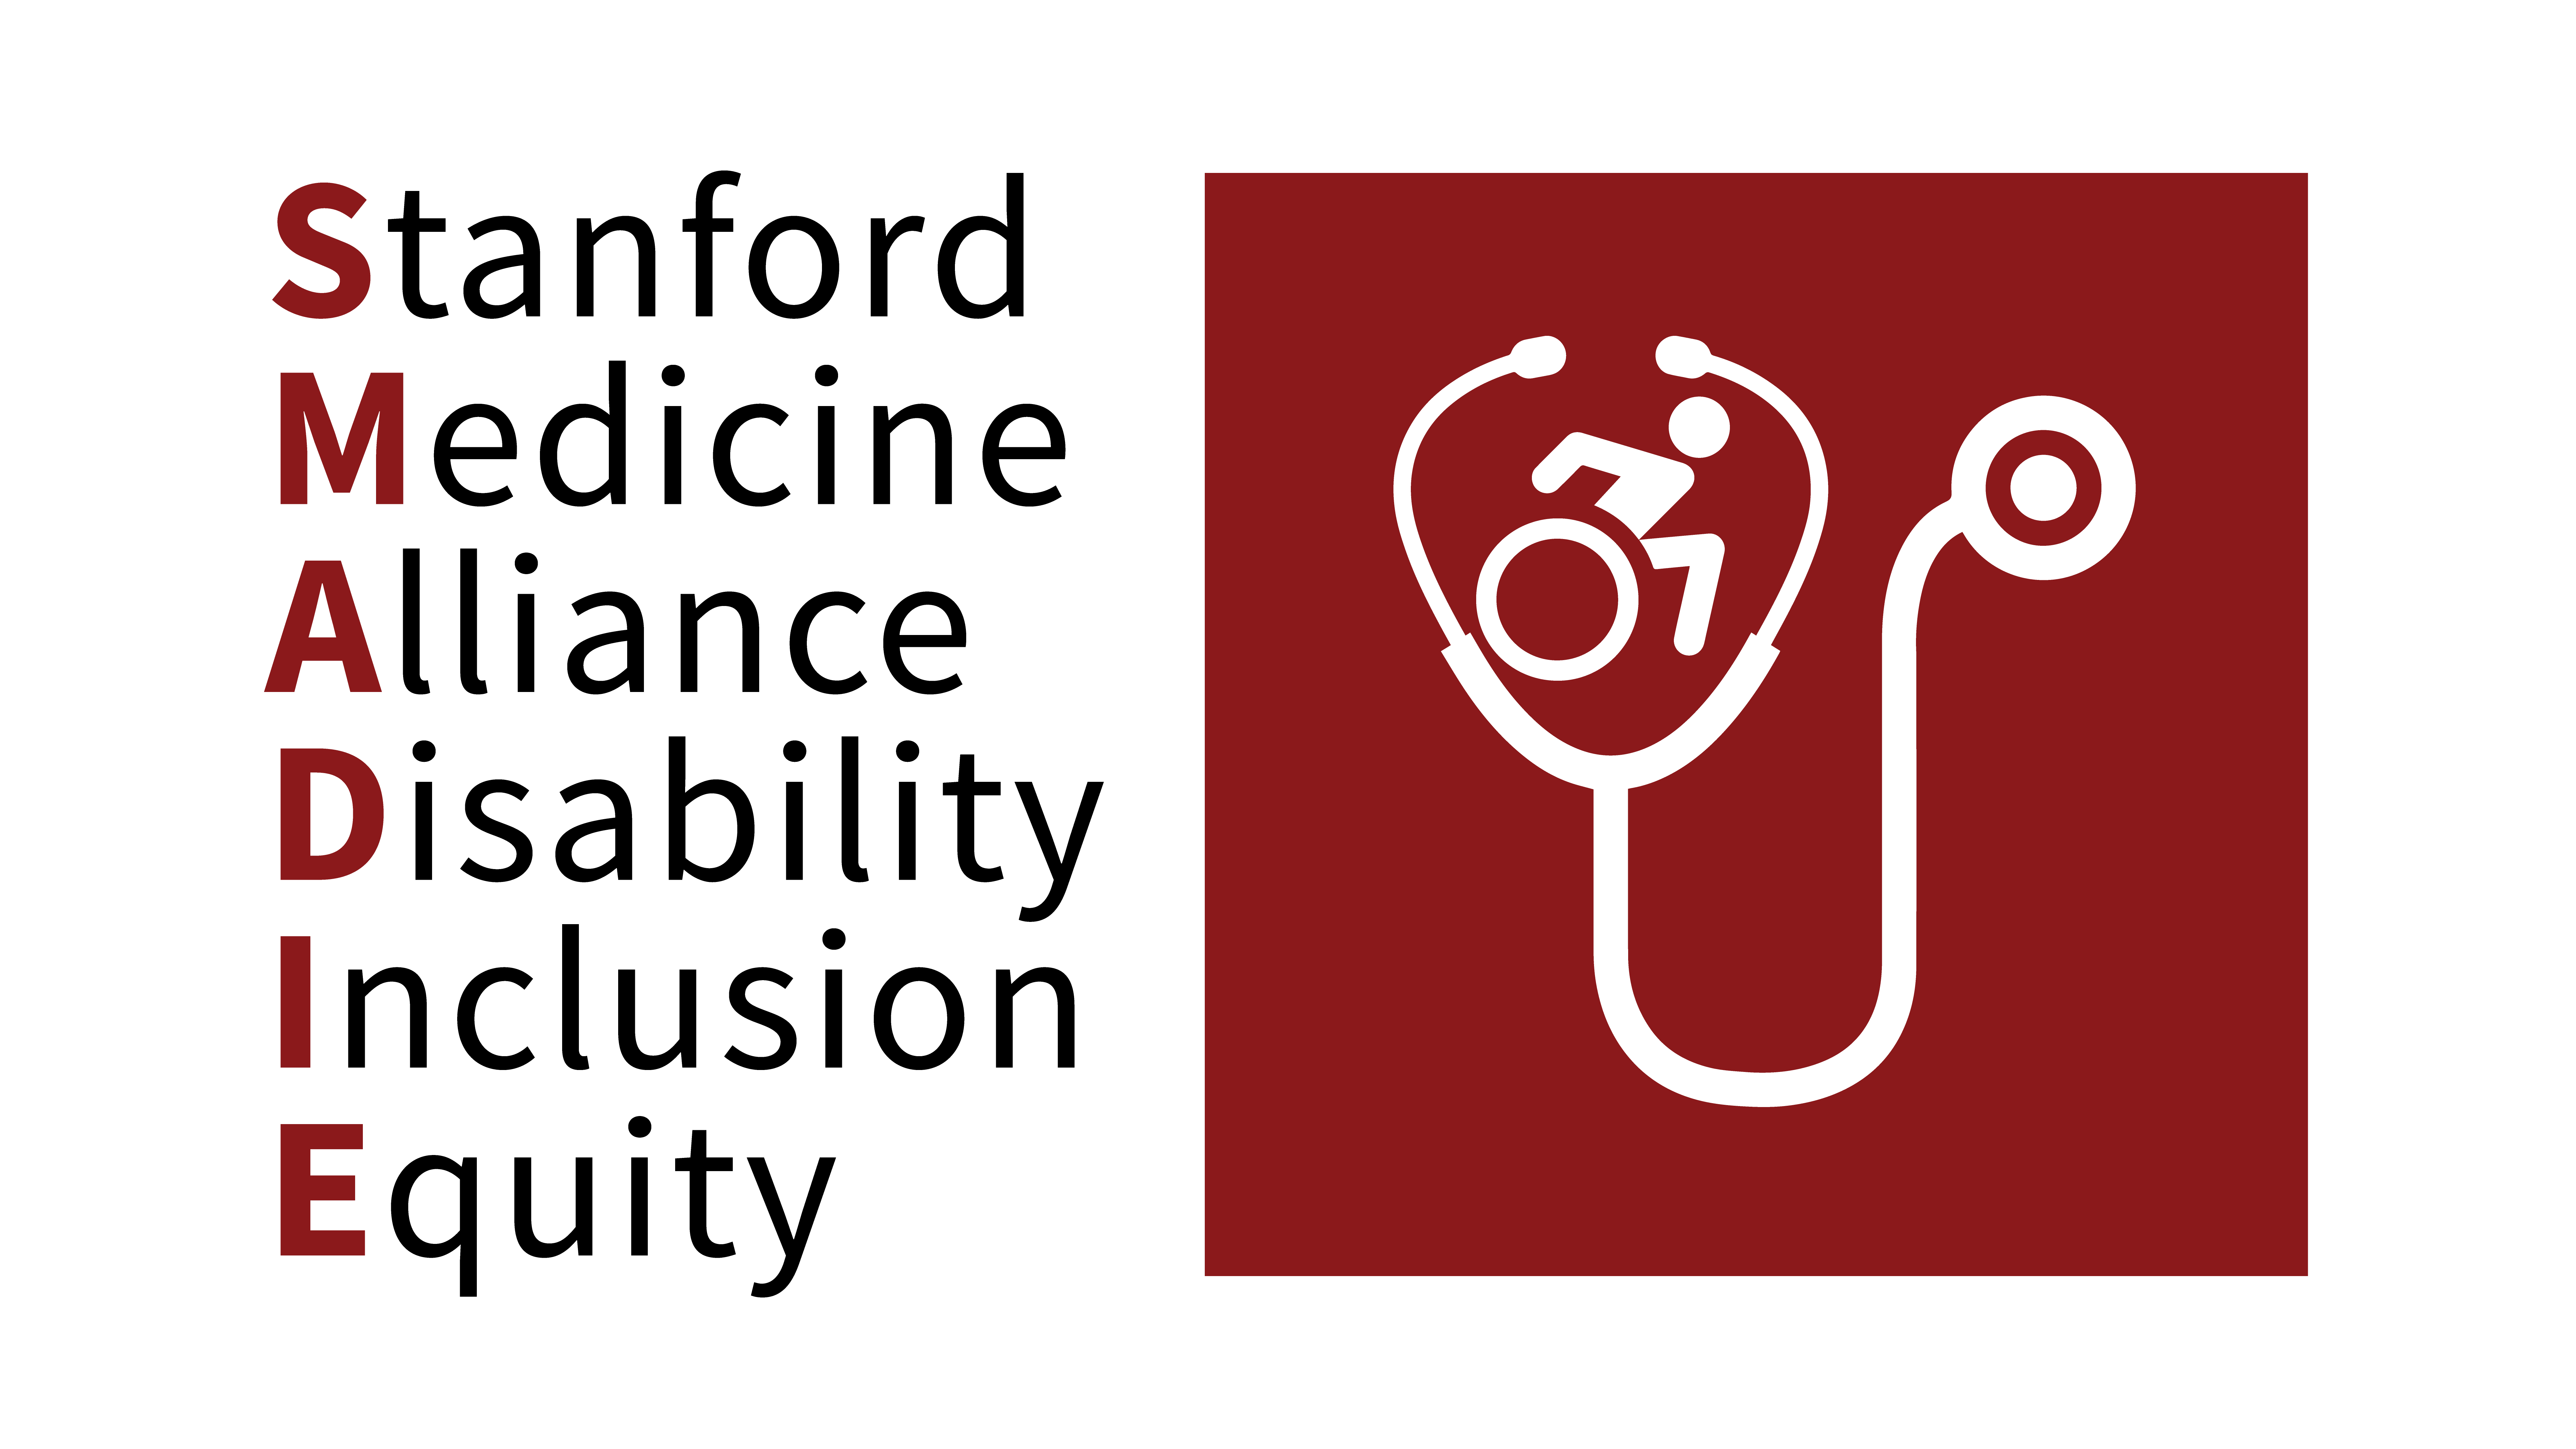 Stanford Medicine Alliance Disability Inclusion Equity logo